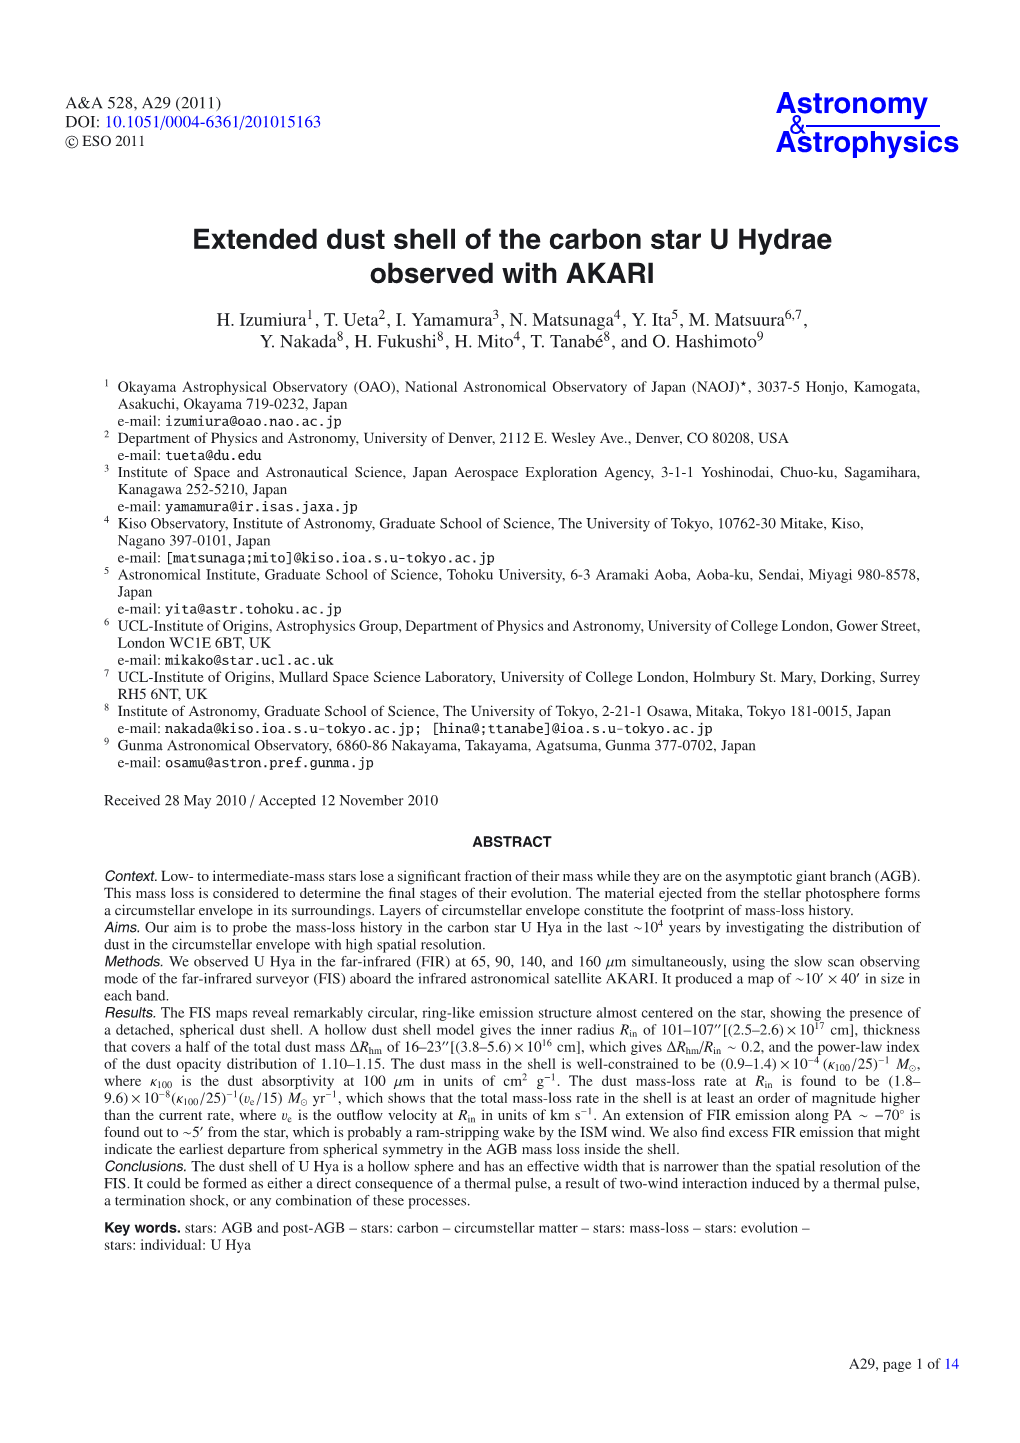 Extended Dust Shell of the Carbon Star U Hydrae Observed with AKARI